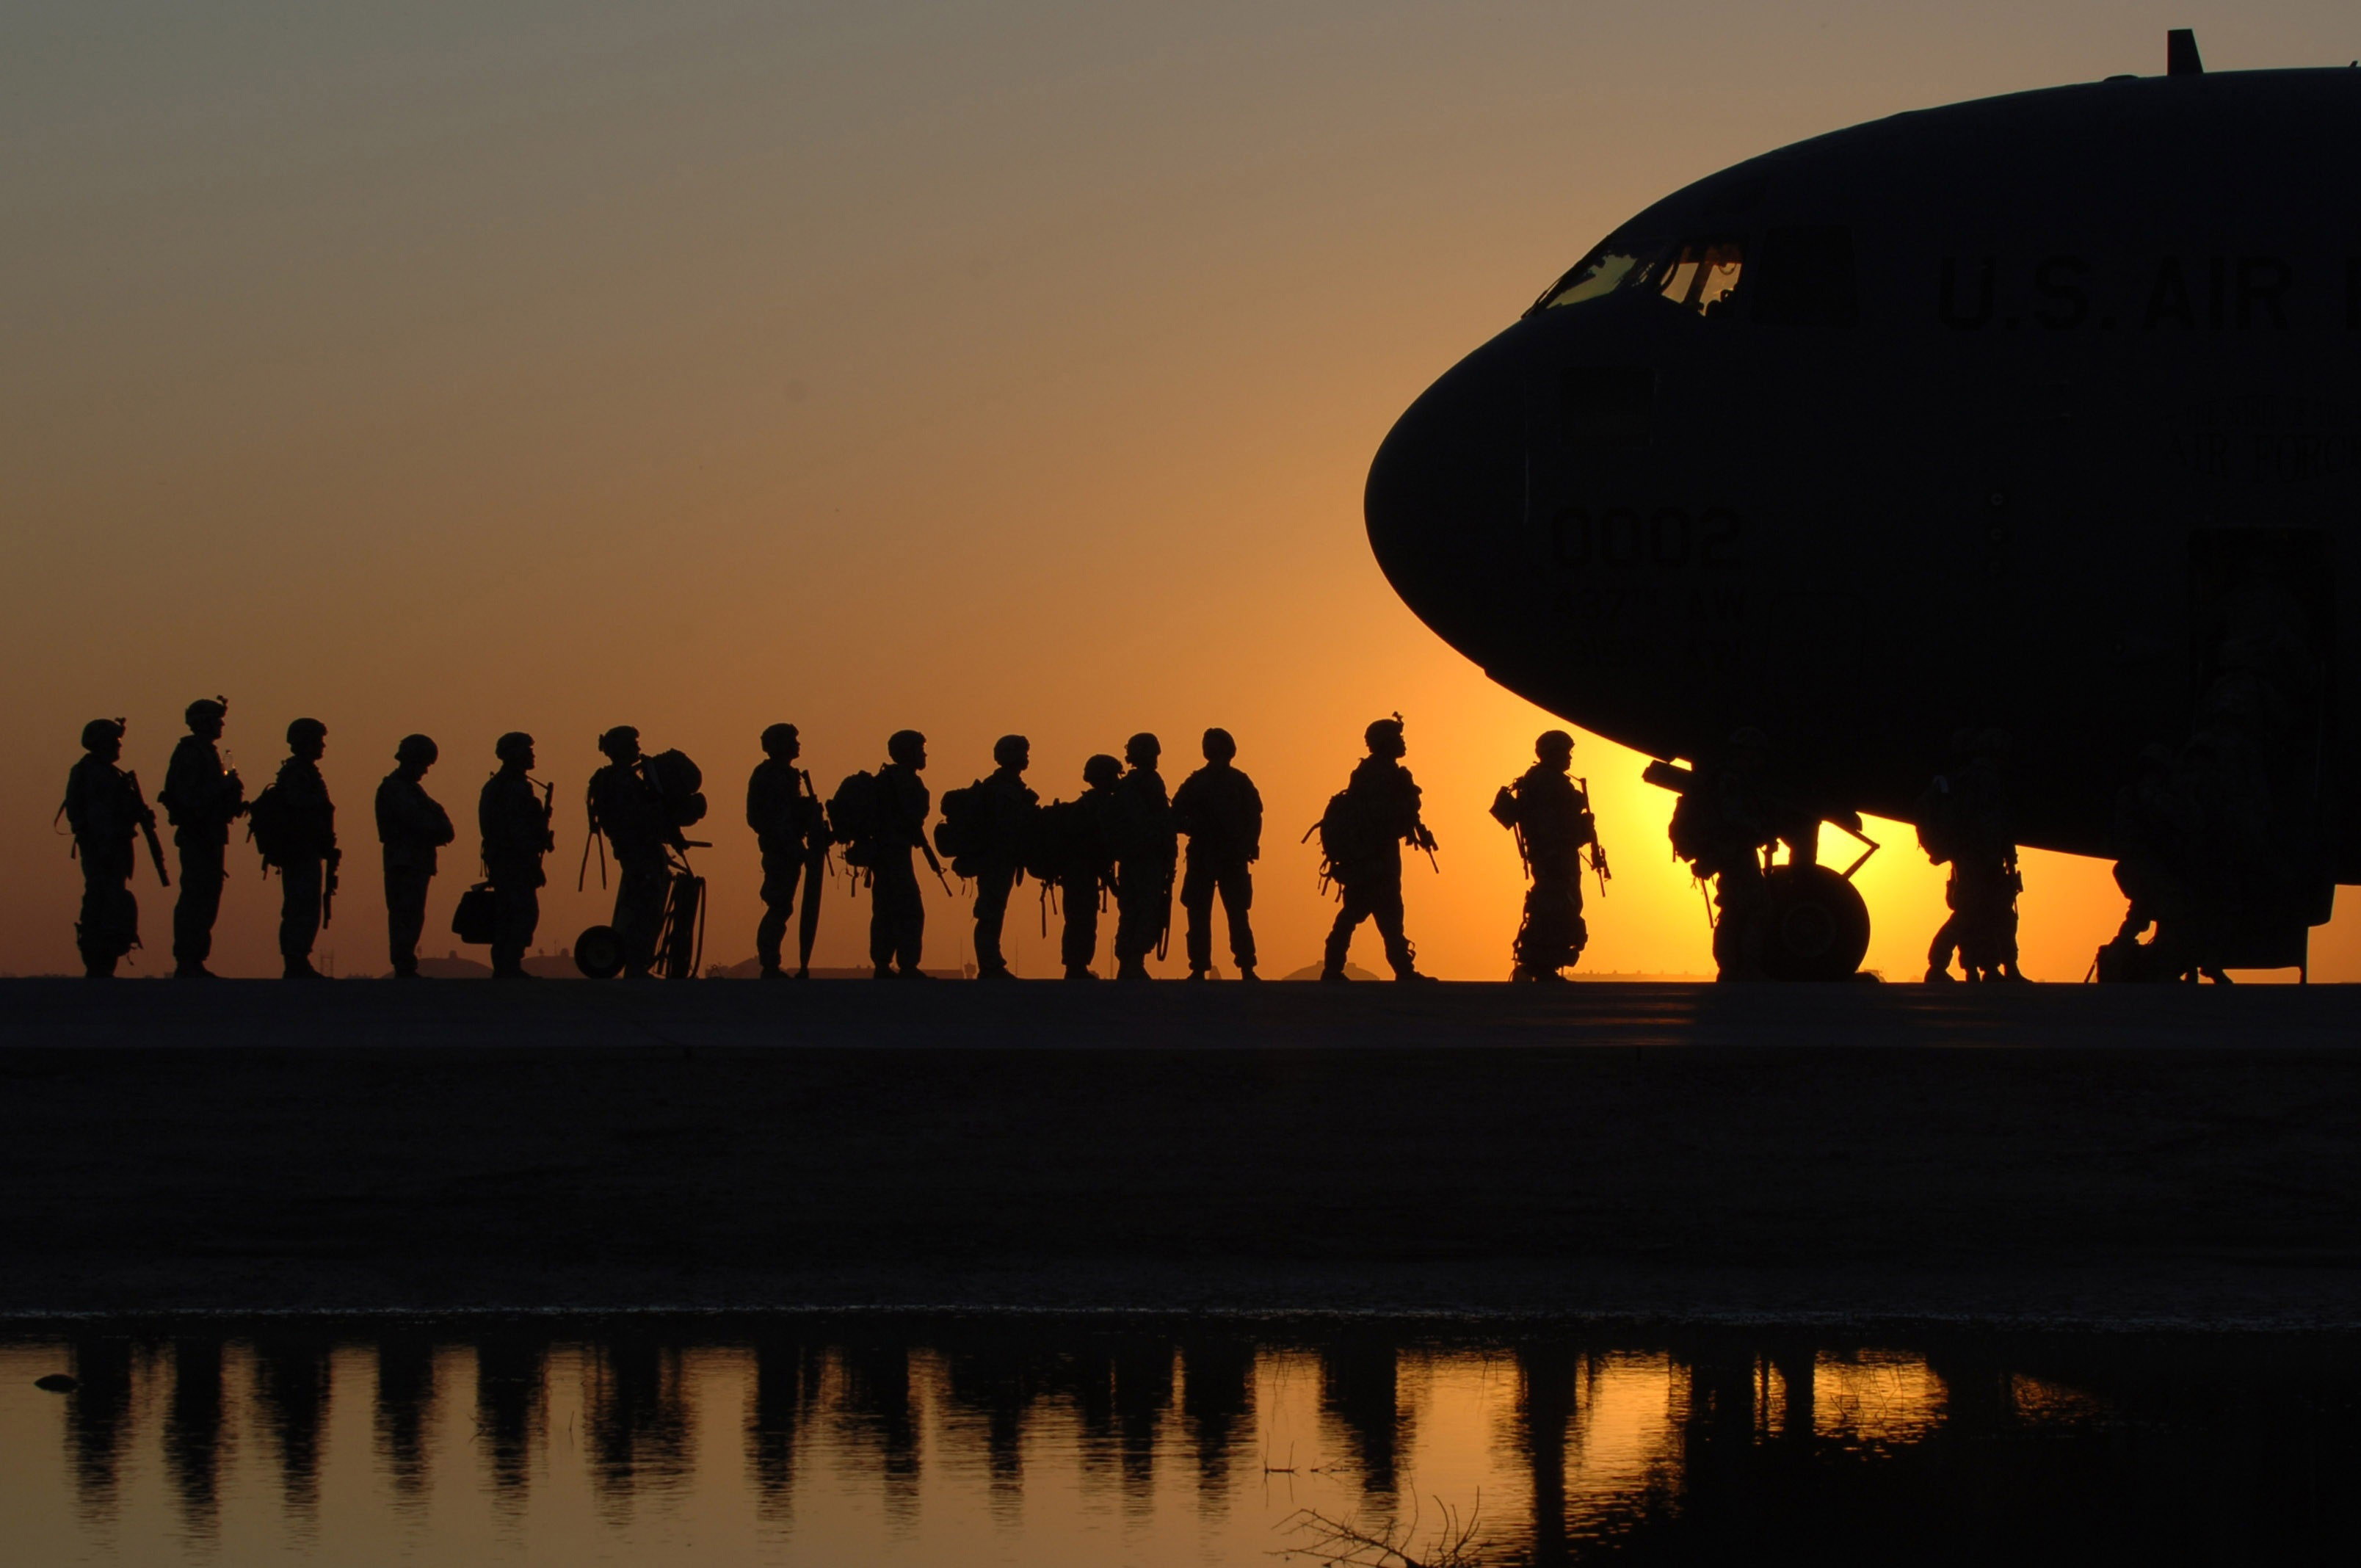 Multiple soldiers lined up to enter a large airplane with sunset behind them